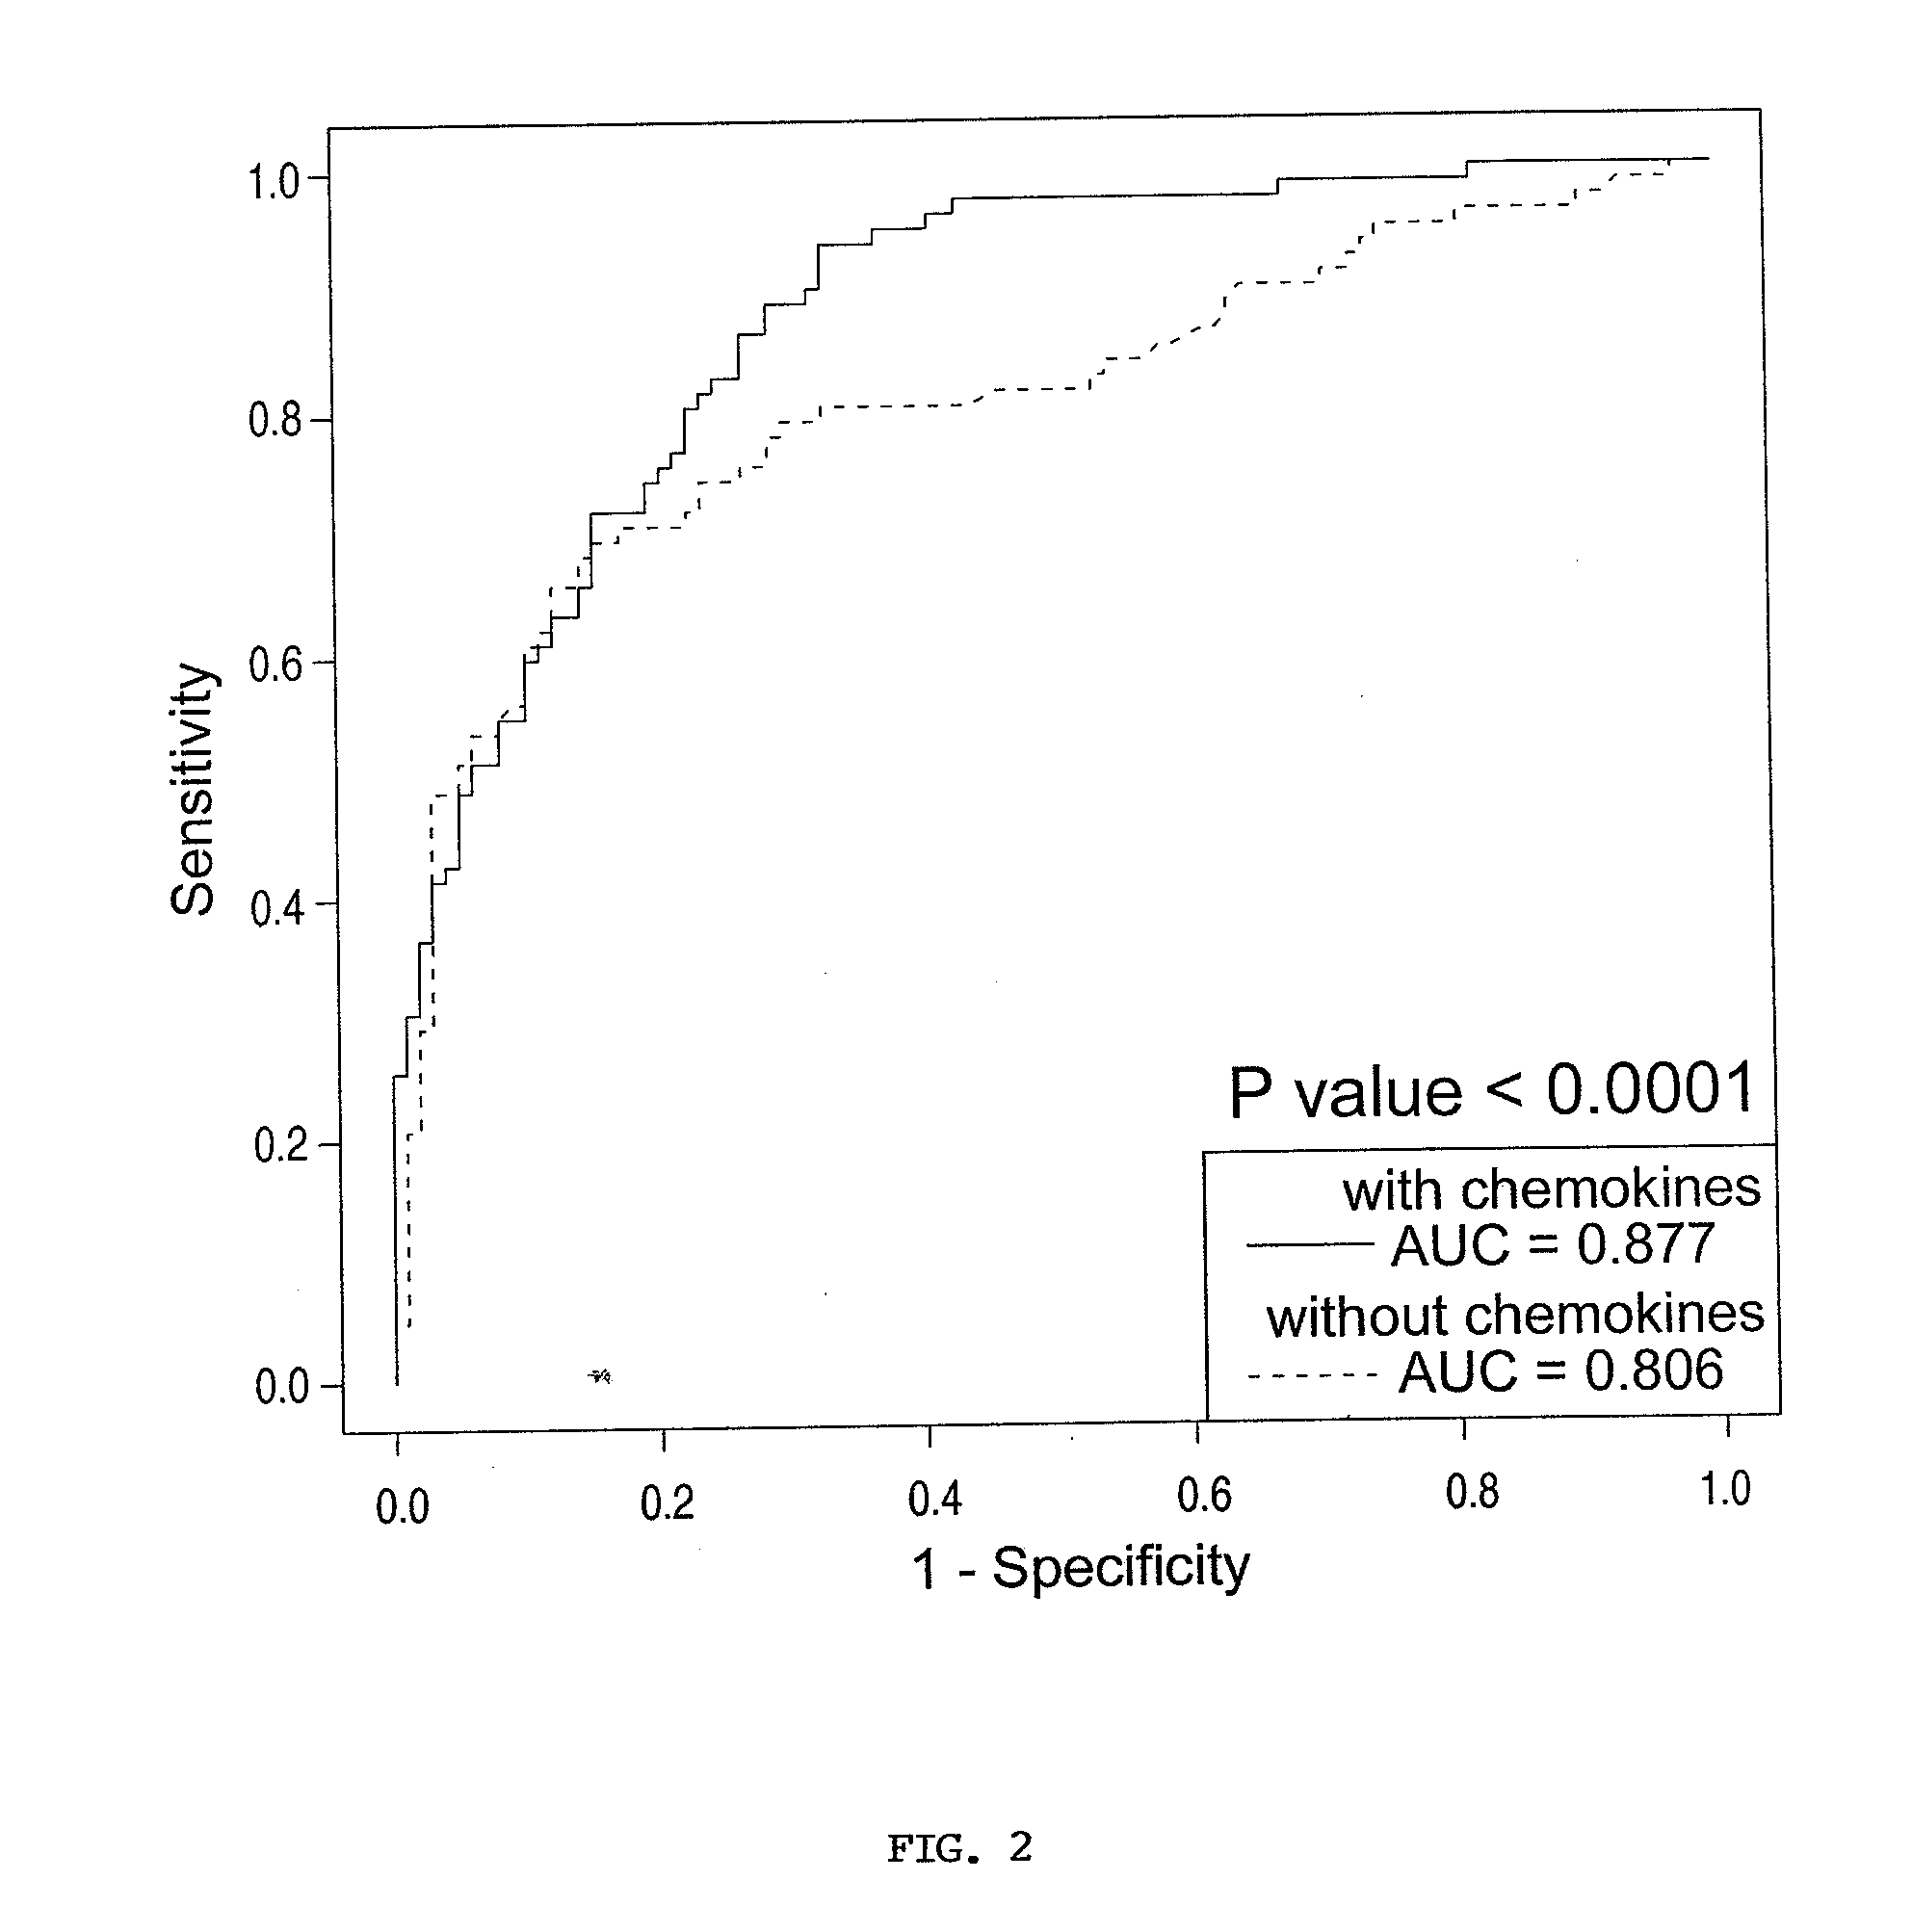 Methods for predicting prostate cancer recurrence